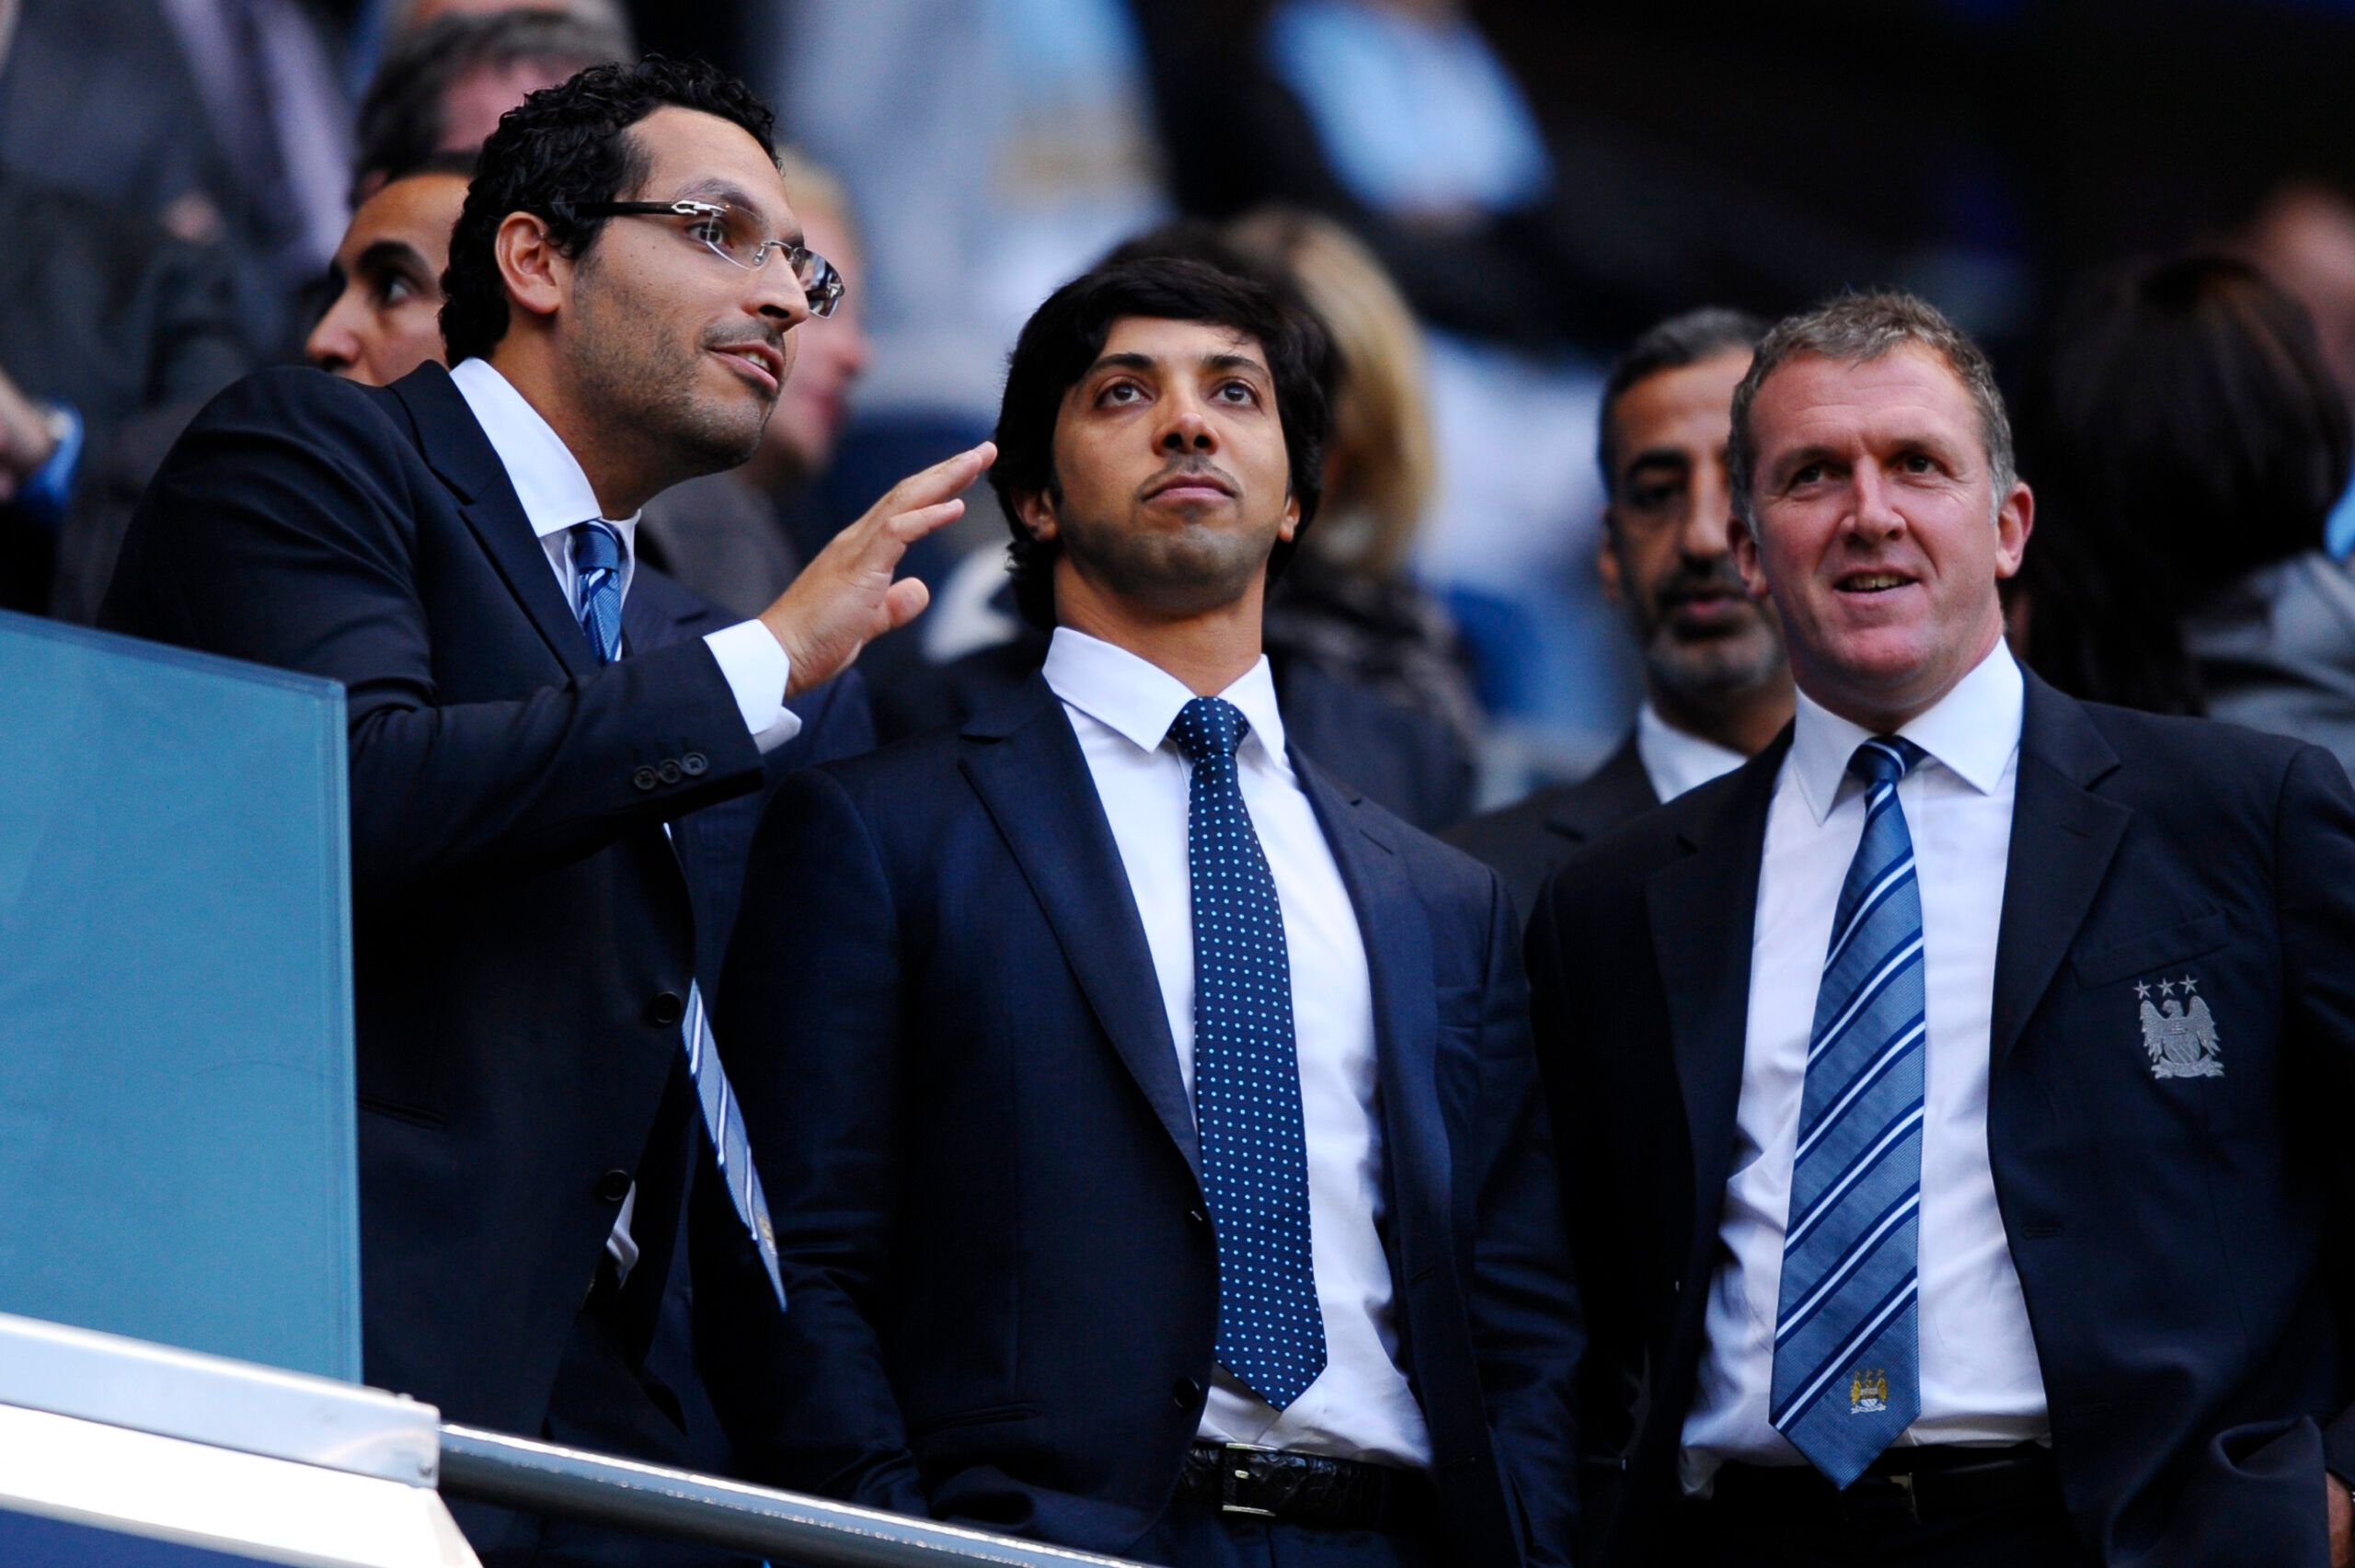 Football - Manchester City v Liverpool - Barclays Premier League - The City of Manchester Stadium - 10/11 - 23/8/10 
(L-R) - Manchester City Chairman Khaldoon Al Mubarak, owner Sheikh Mansour and Chief Executive Garry Cook  
Mandatory Credit: Action Images / Jason Cairnduff 
NO ONLINE/INTERNET USE WITHOUT A LICENCE FROM THE FOOTBALL DATA CO LTD. FOR LICENCE ENQUIRIES PLEASE TELEPHONE +44 (0) 207 864 9000.